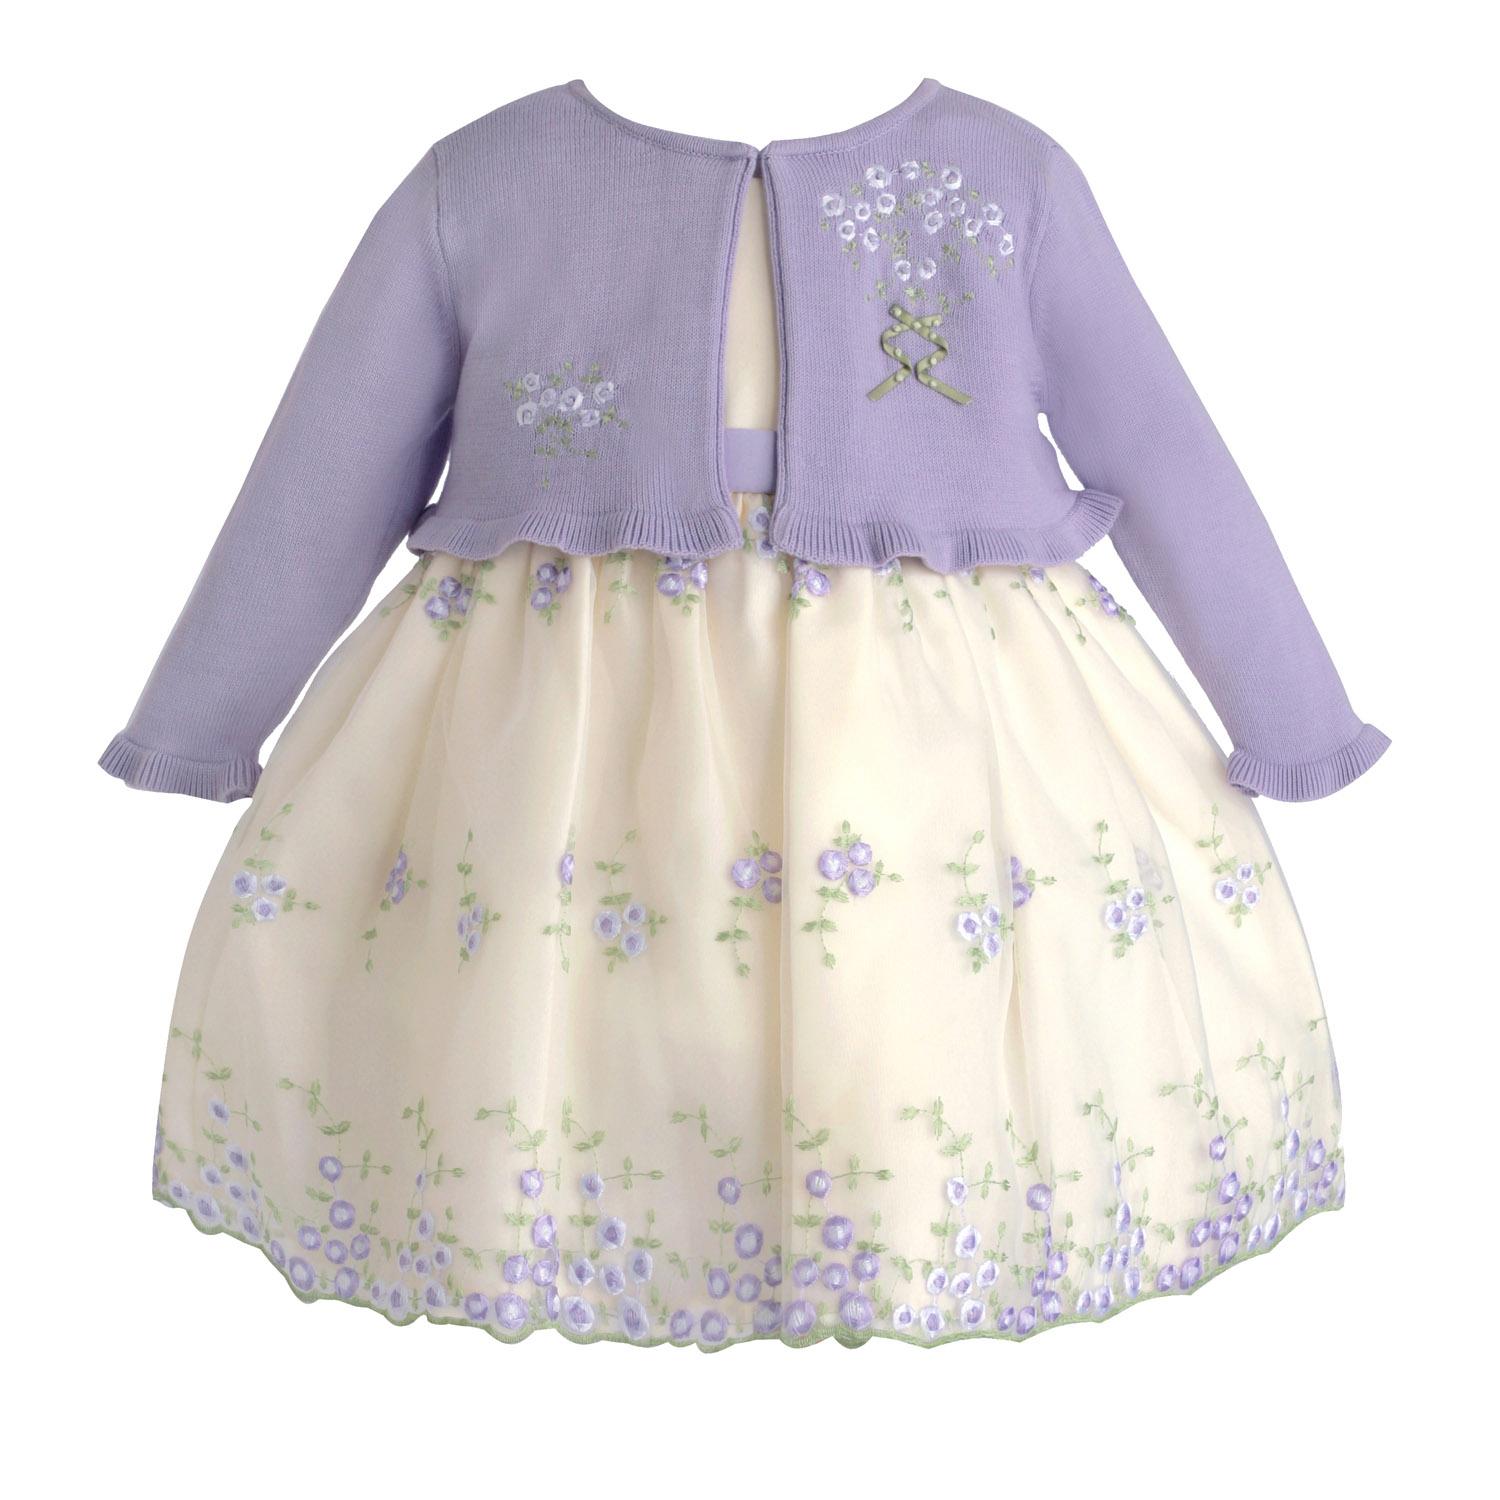 American Princess Infant & Toddler Girl's Embroidered Party Dress & Cardigan